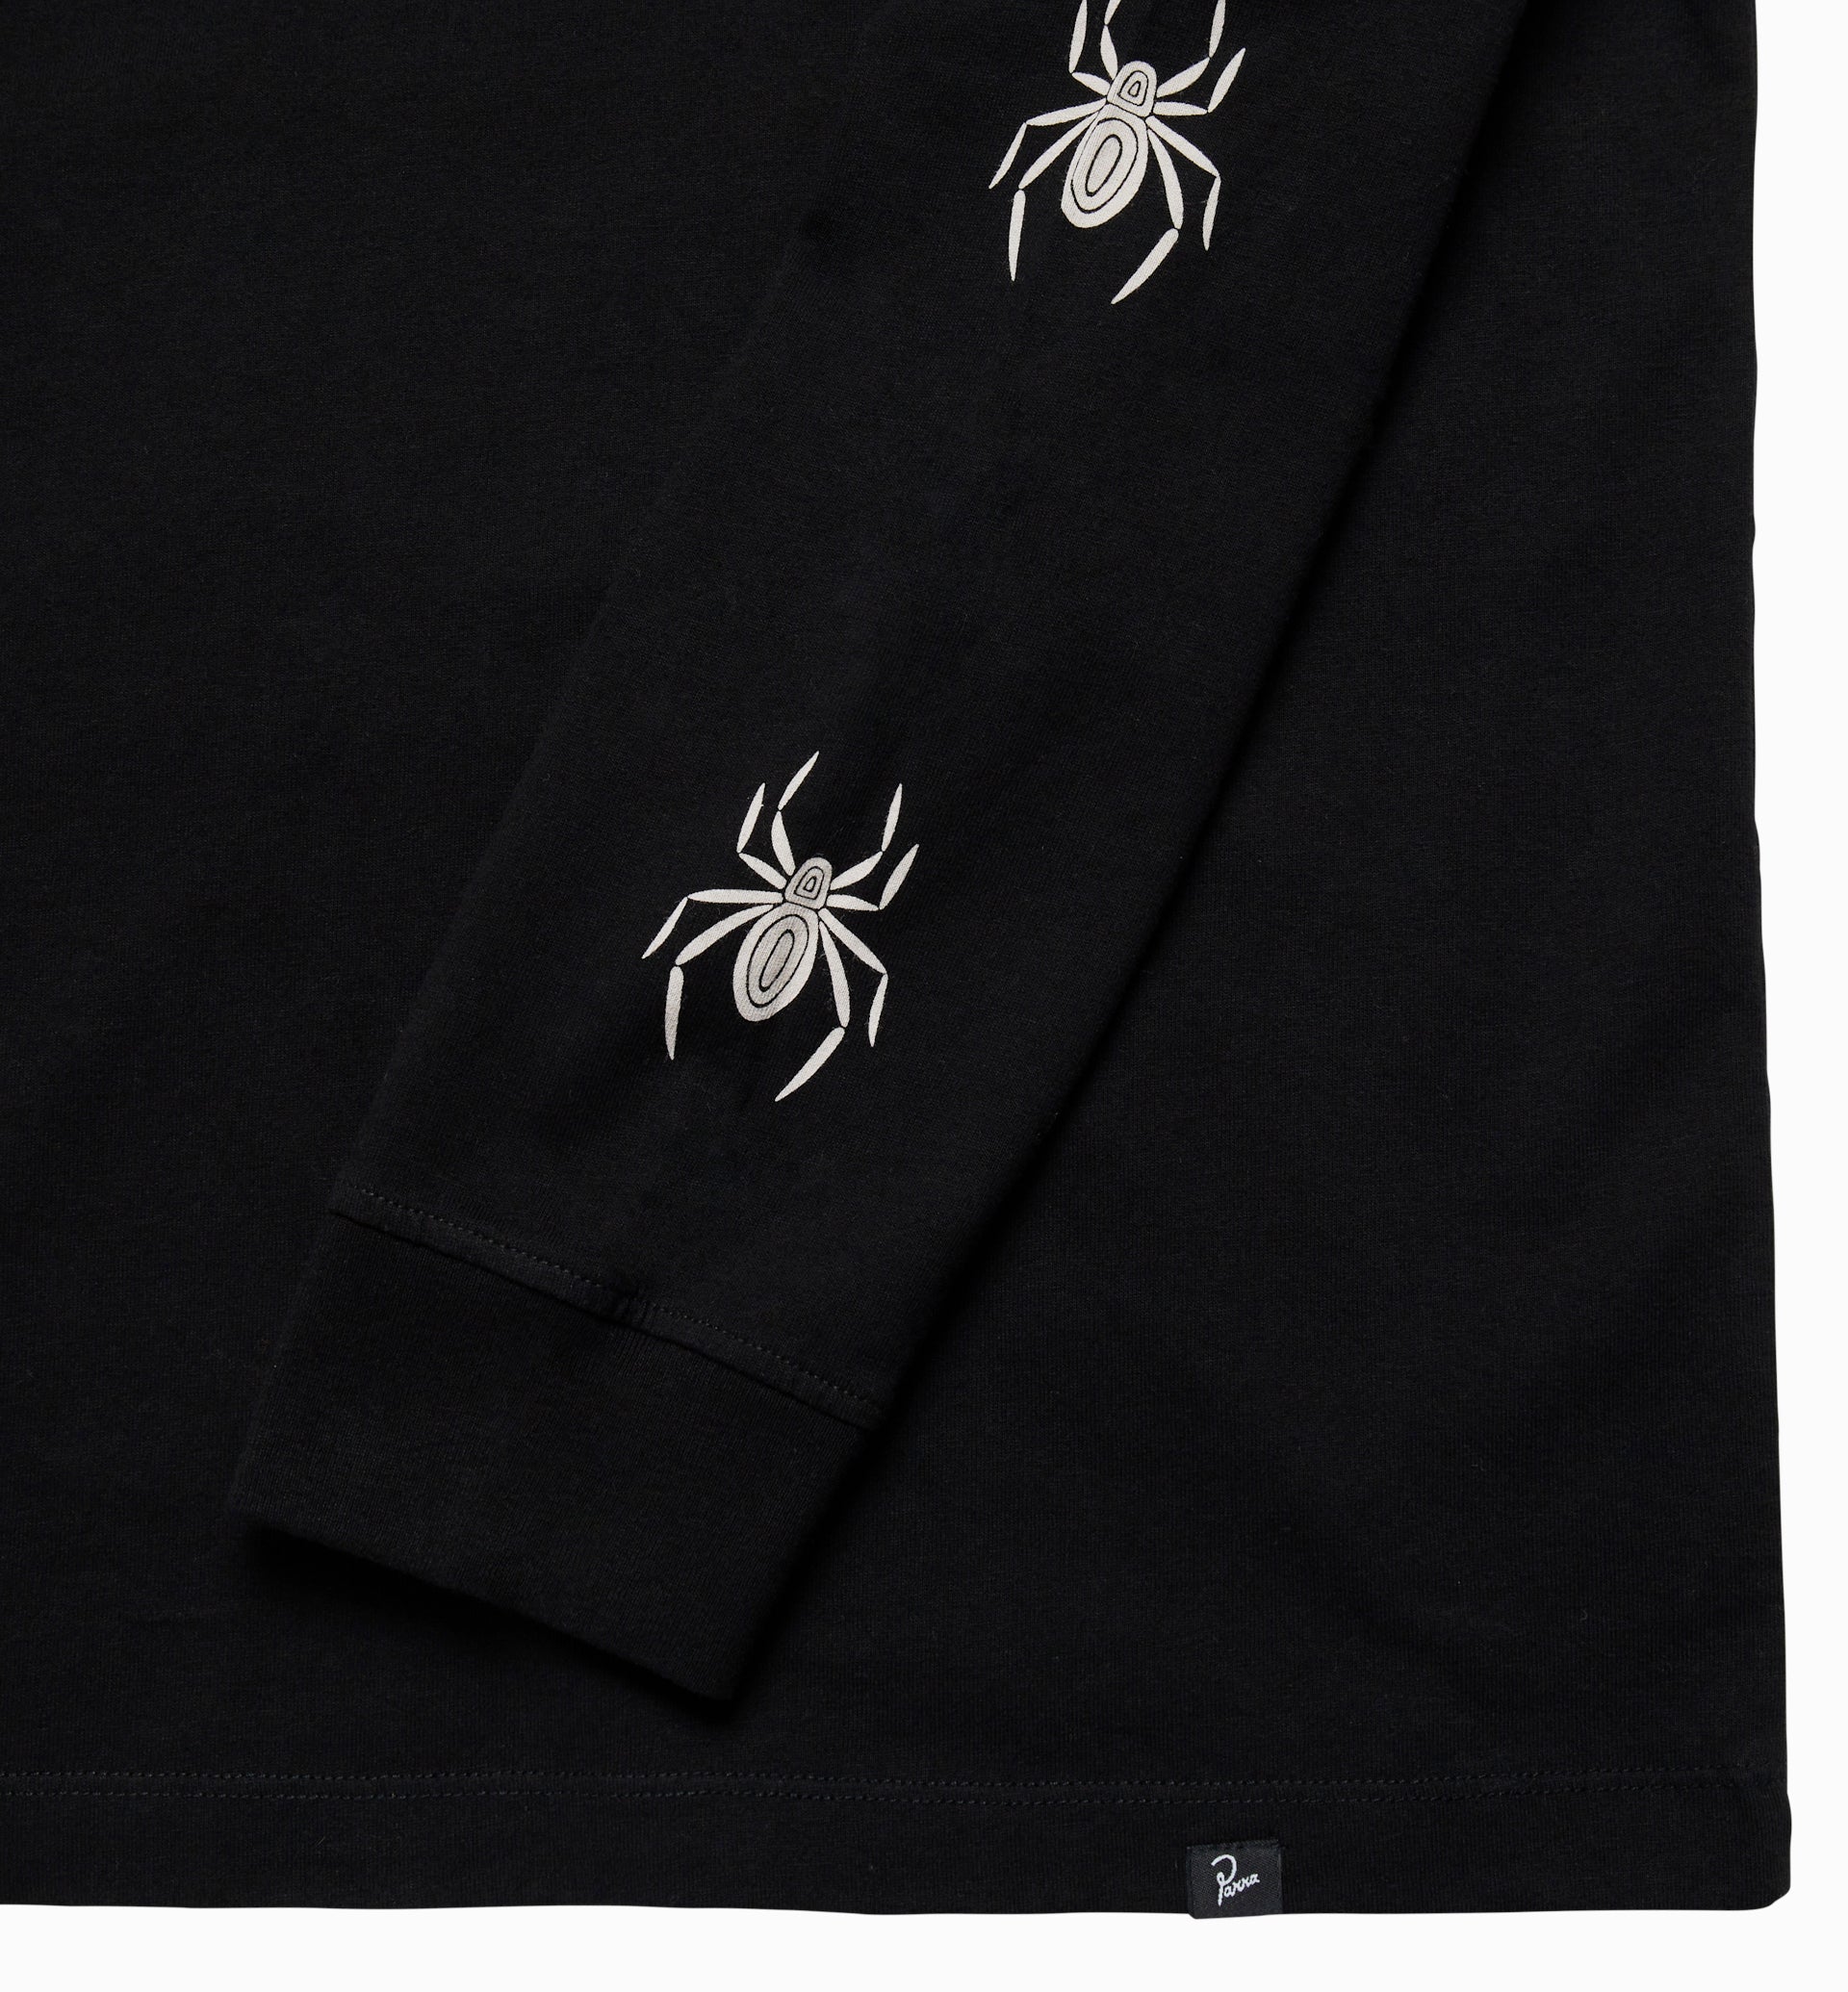 Parra - spidered long sleeve t-shirt